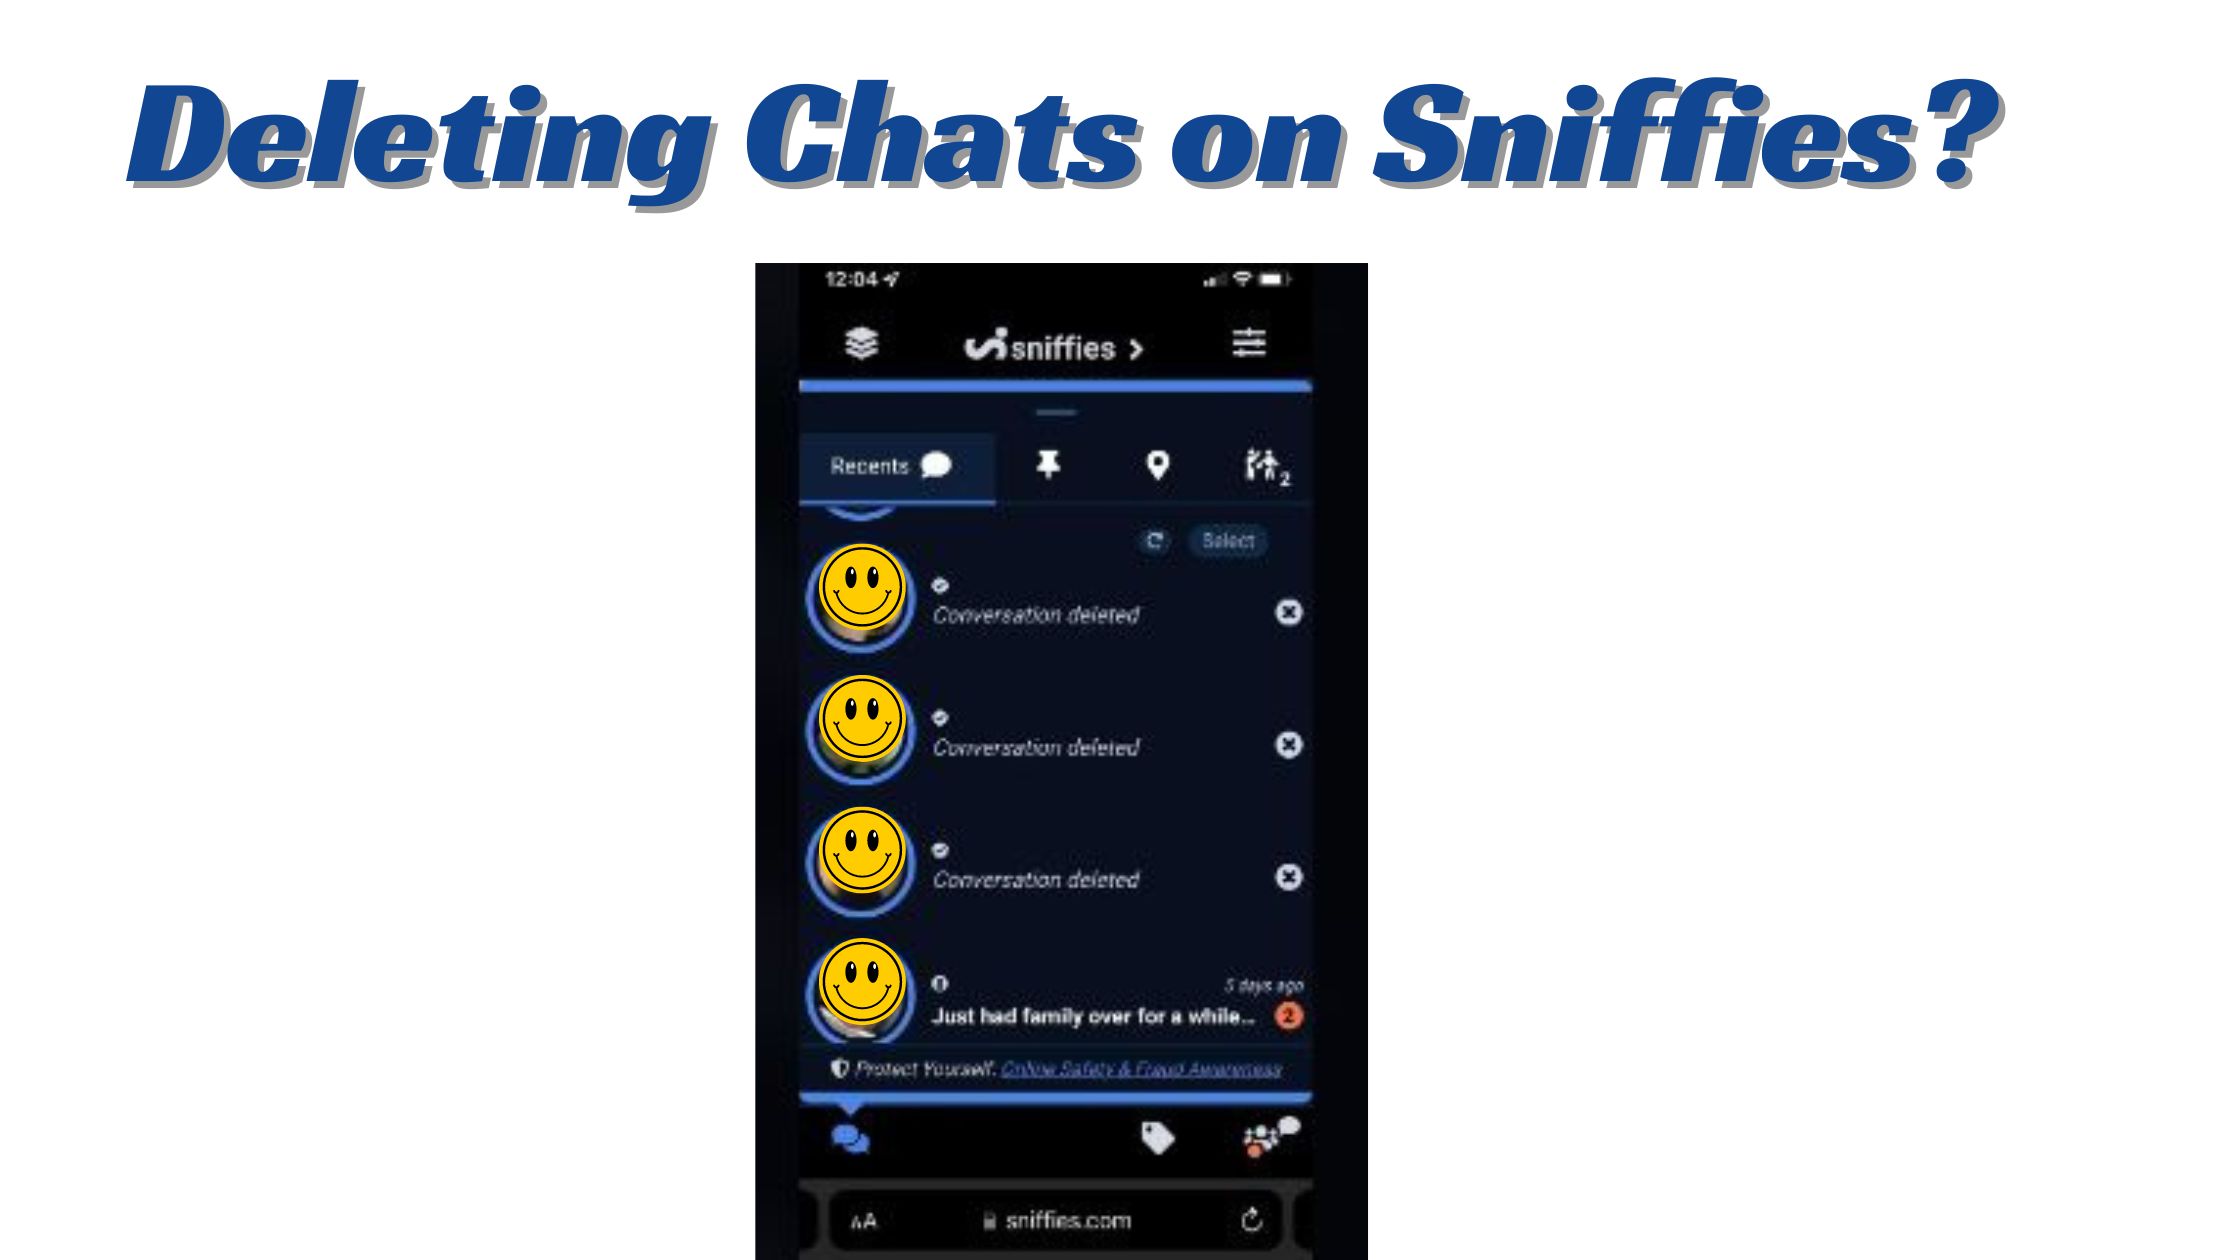 Delete Chats on Sniffies